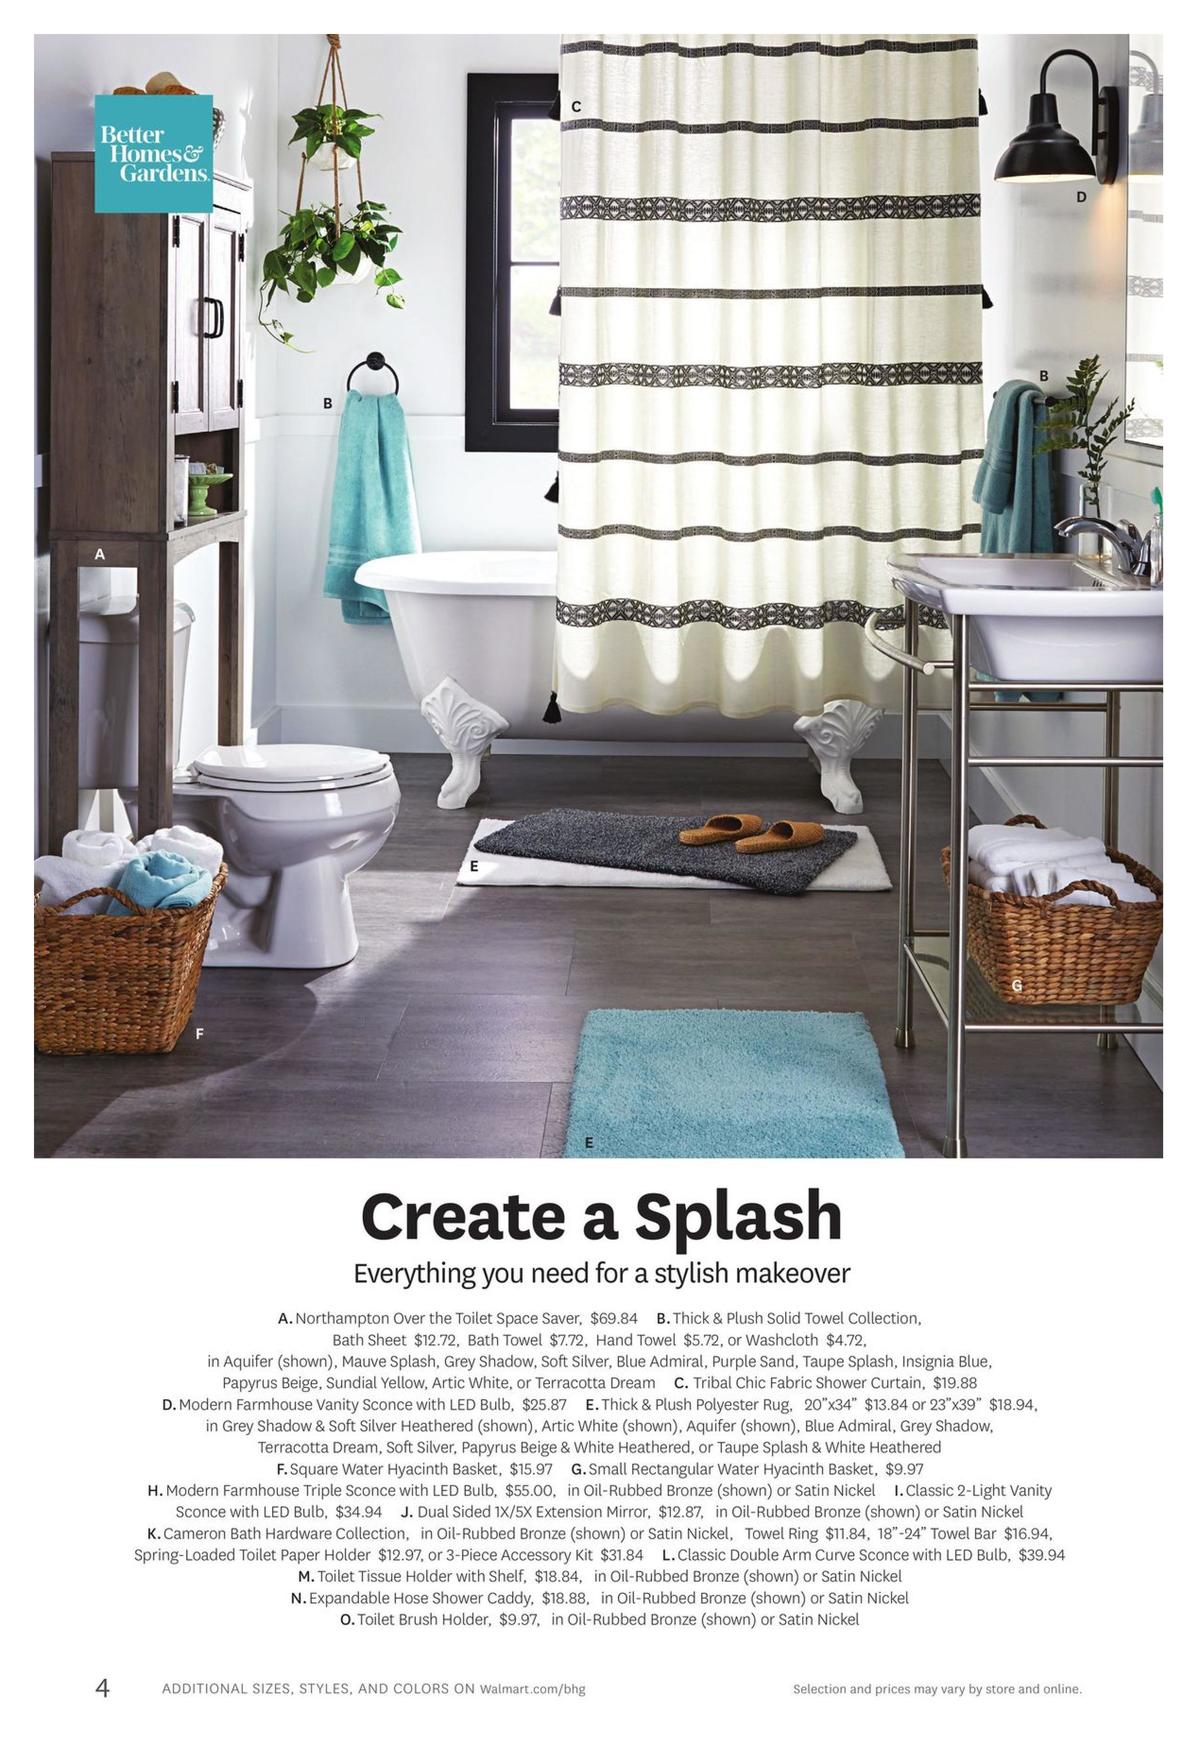 Walmart Better Homes & Gardens Weekly Ad from July 15